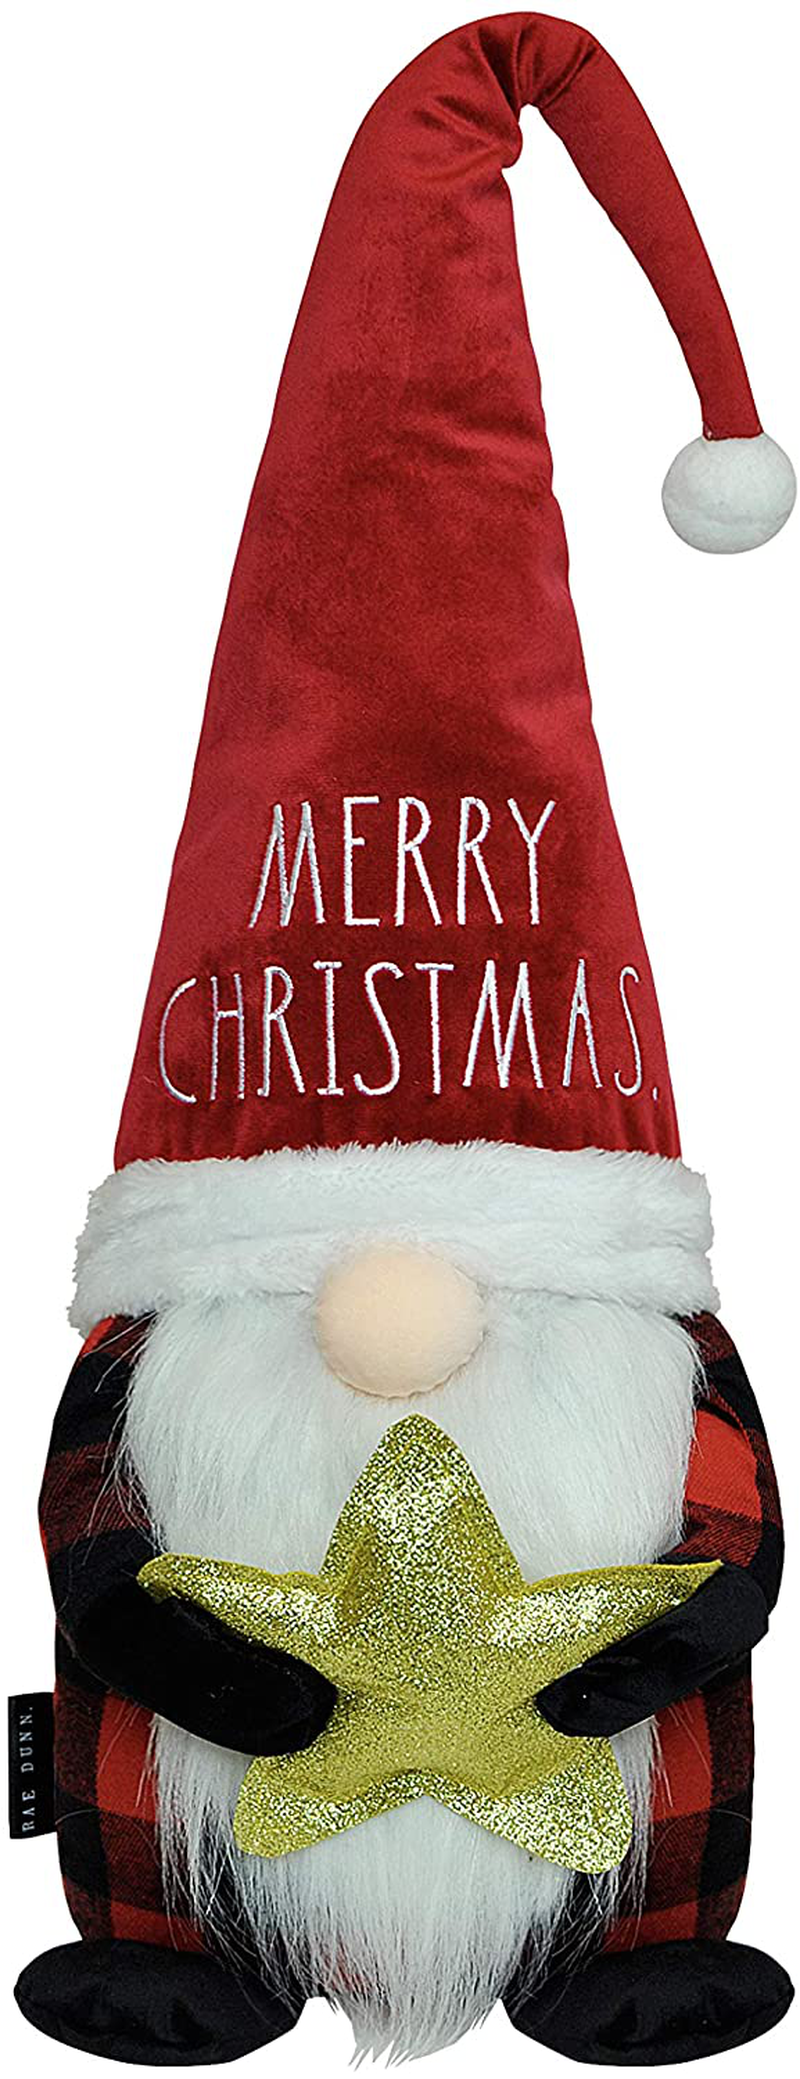 Rae Dunn Christmas Gnome Merry - 19 Inch Stuffed Plush Santa Figurine Doll with Felt Hat - Cute Ornaments and Holiday Decorations for Home Decor and Office Home & Garden > Decor > Seasonal & Holiday Decorations& Garden > Decor > Seasonal & Holiday Decorations Rae Dunn Red With Gold Star - Merry Christmas  